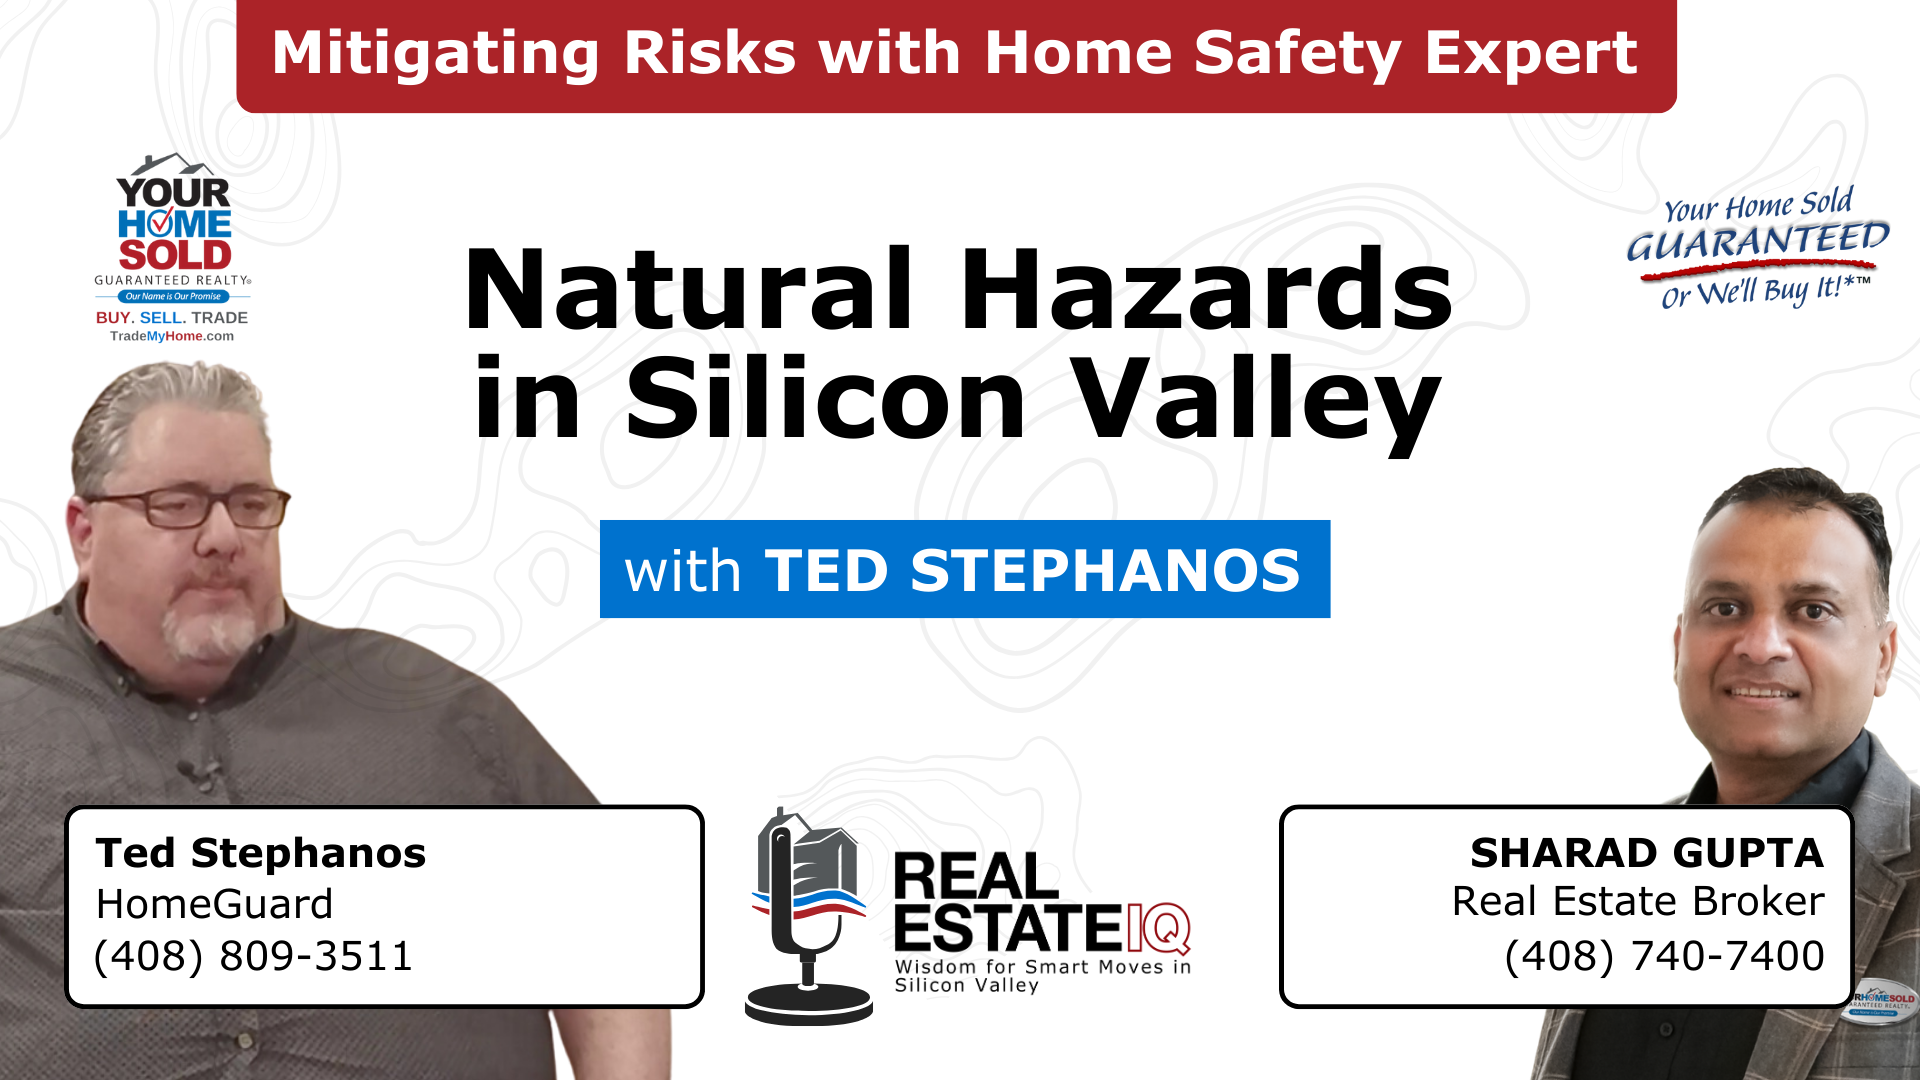 Natural Hazards in Silicon Valley: Mitigating Risks with Home Safety Expert